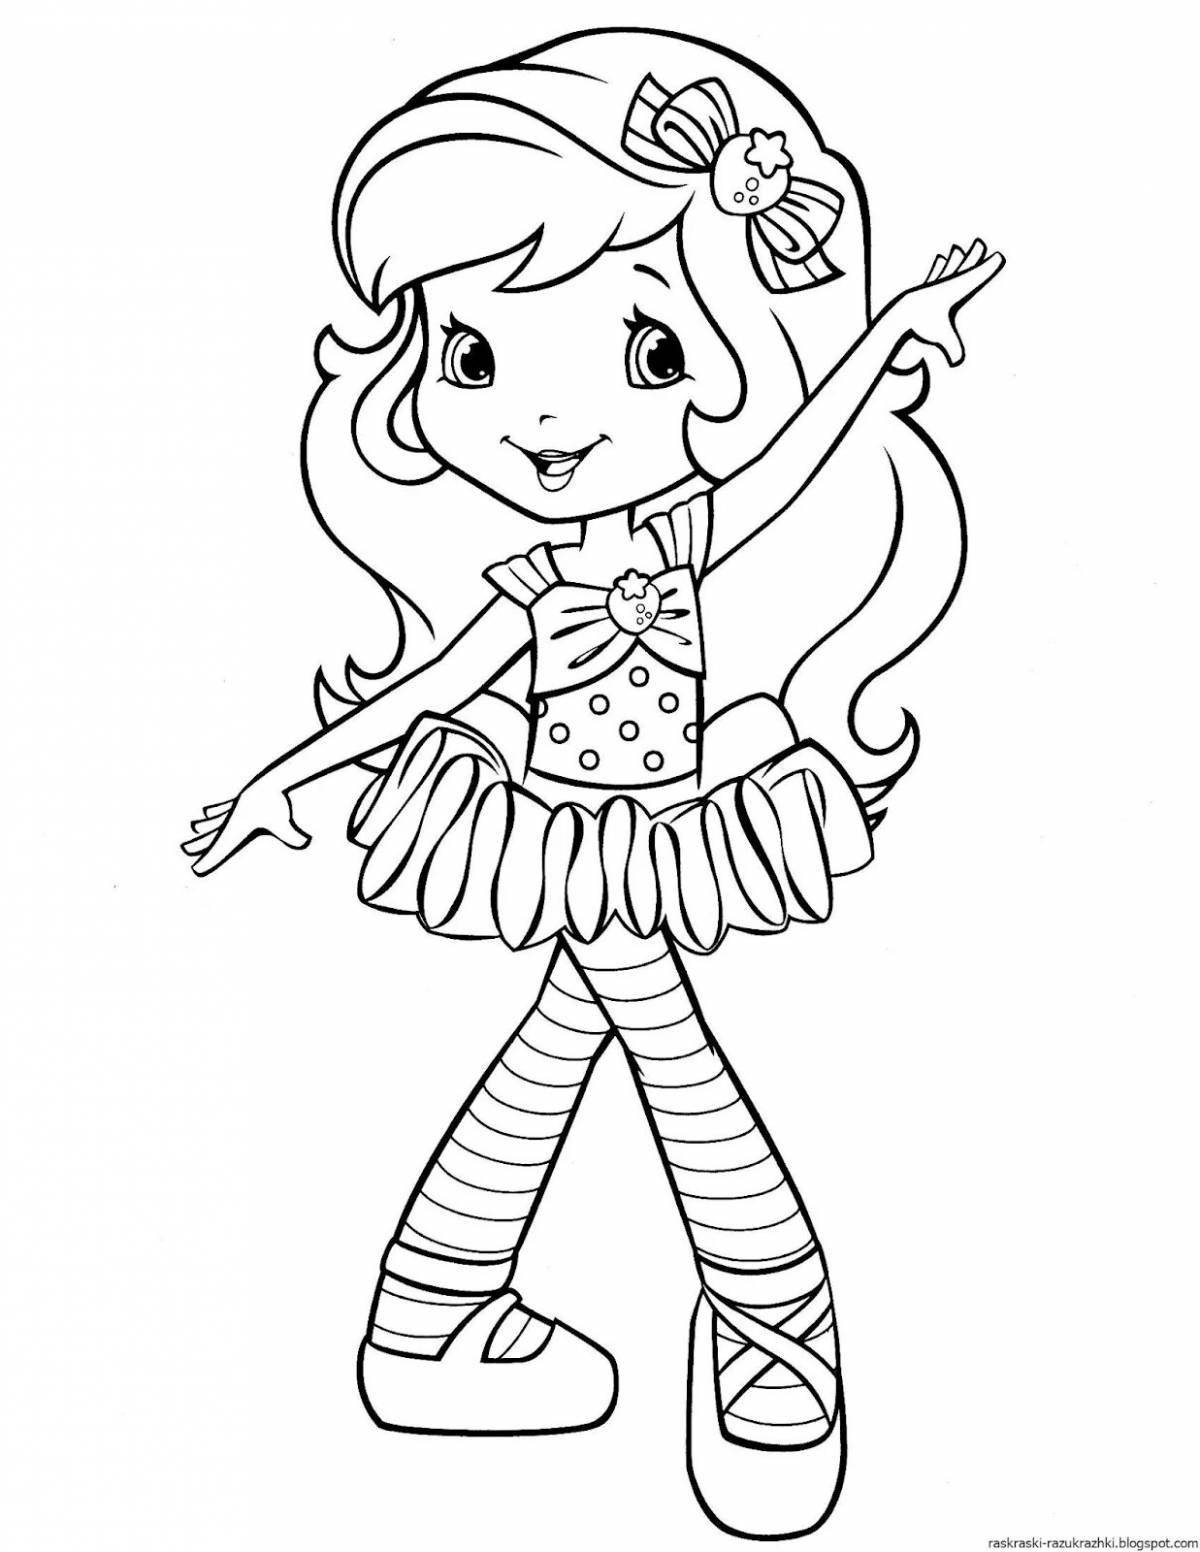 Cute fairy coloring pages for kids